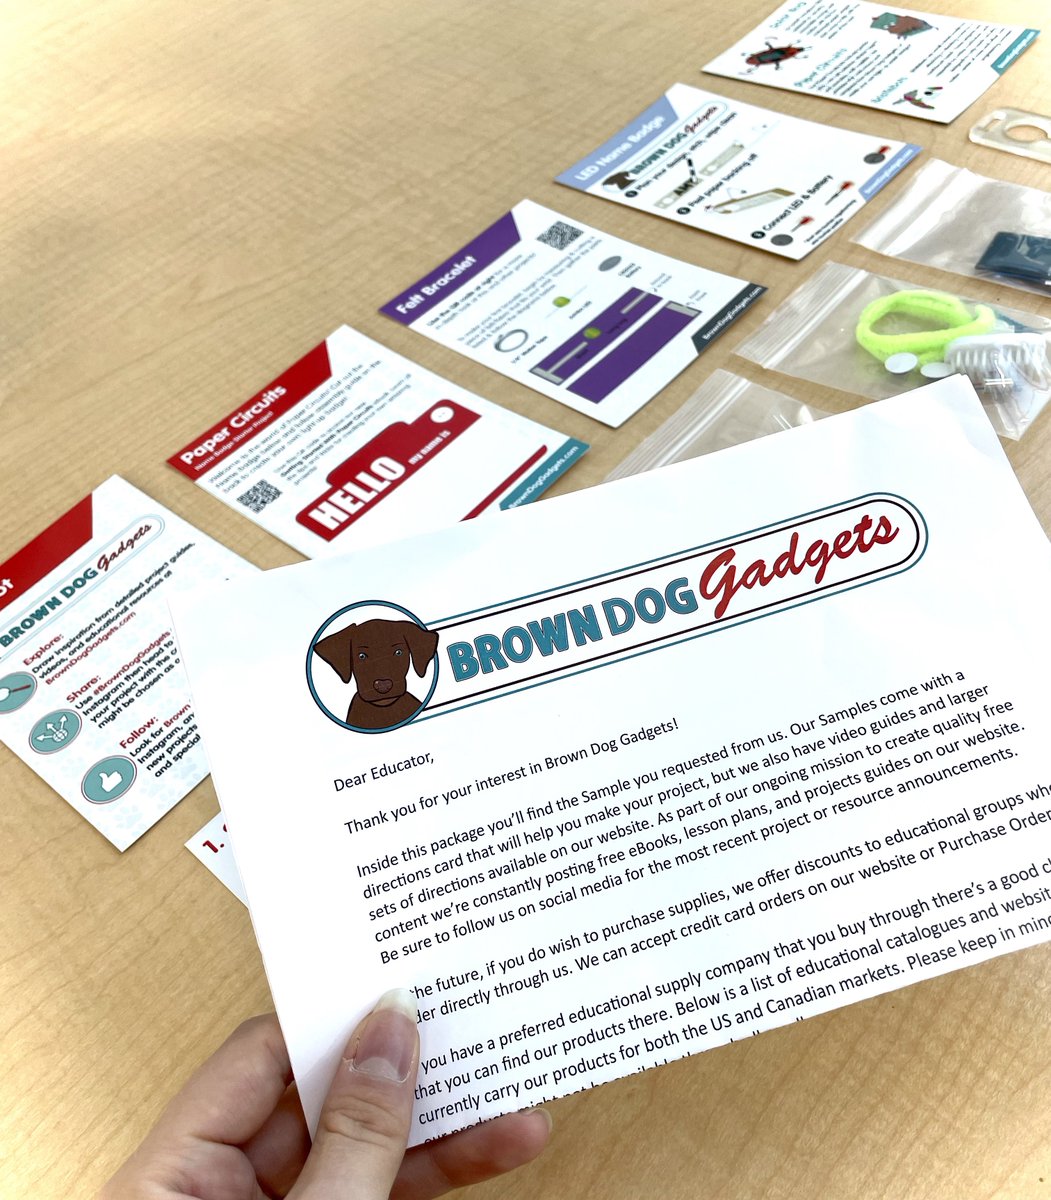 Exciting update! 🌟 I received my FREE @BrownDogGadgets sample of their award-winning #STEM supplies & kits in the mail, and it exceeded my expectations! Don't miss out – I highly recommend requesting one! #papercircuits #Edtech 🚀📚 ➡️ tinyurl.com/bdfj6mrbExciti…